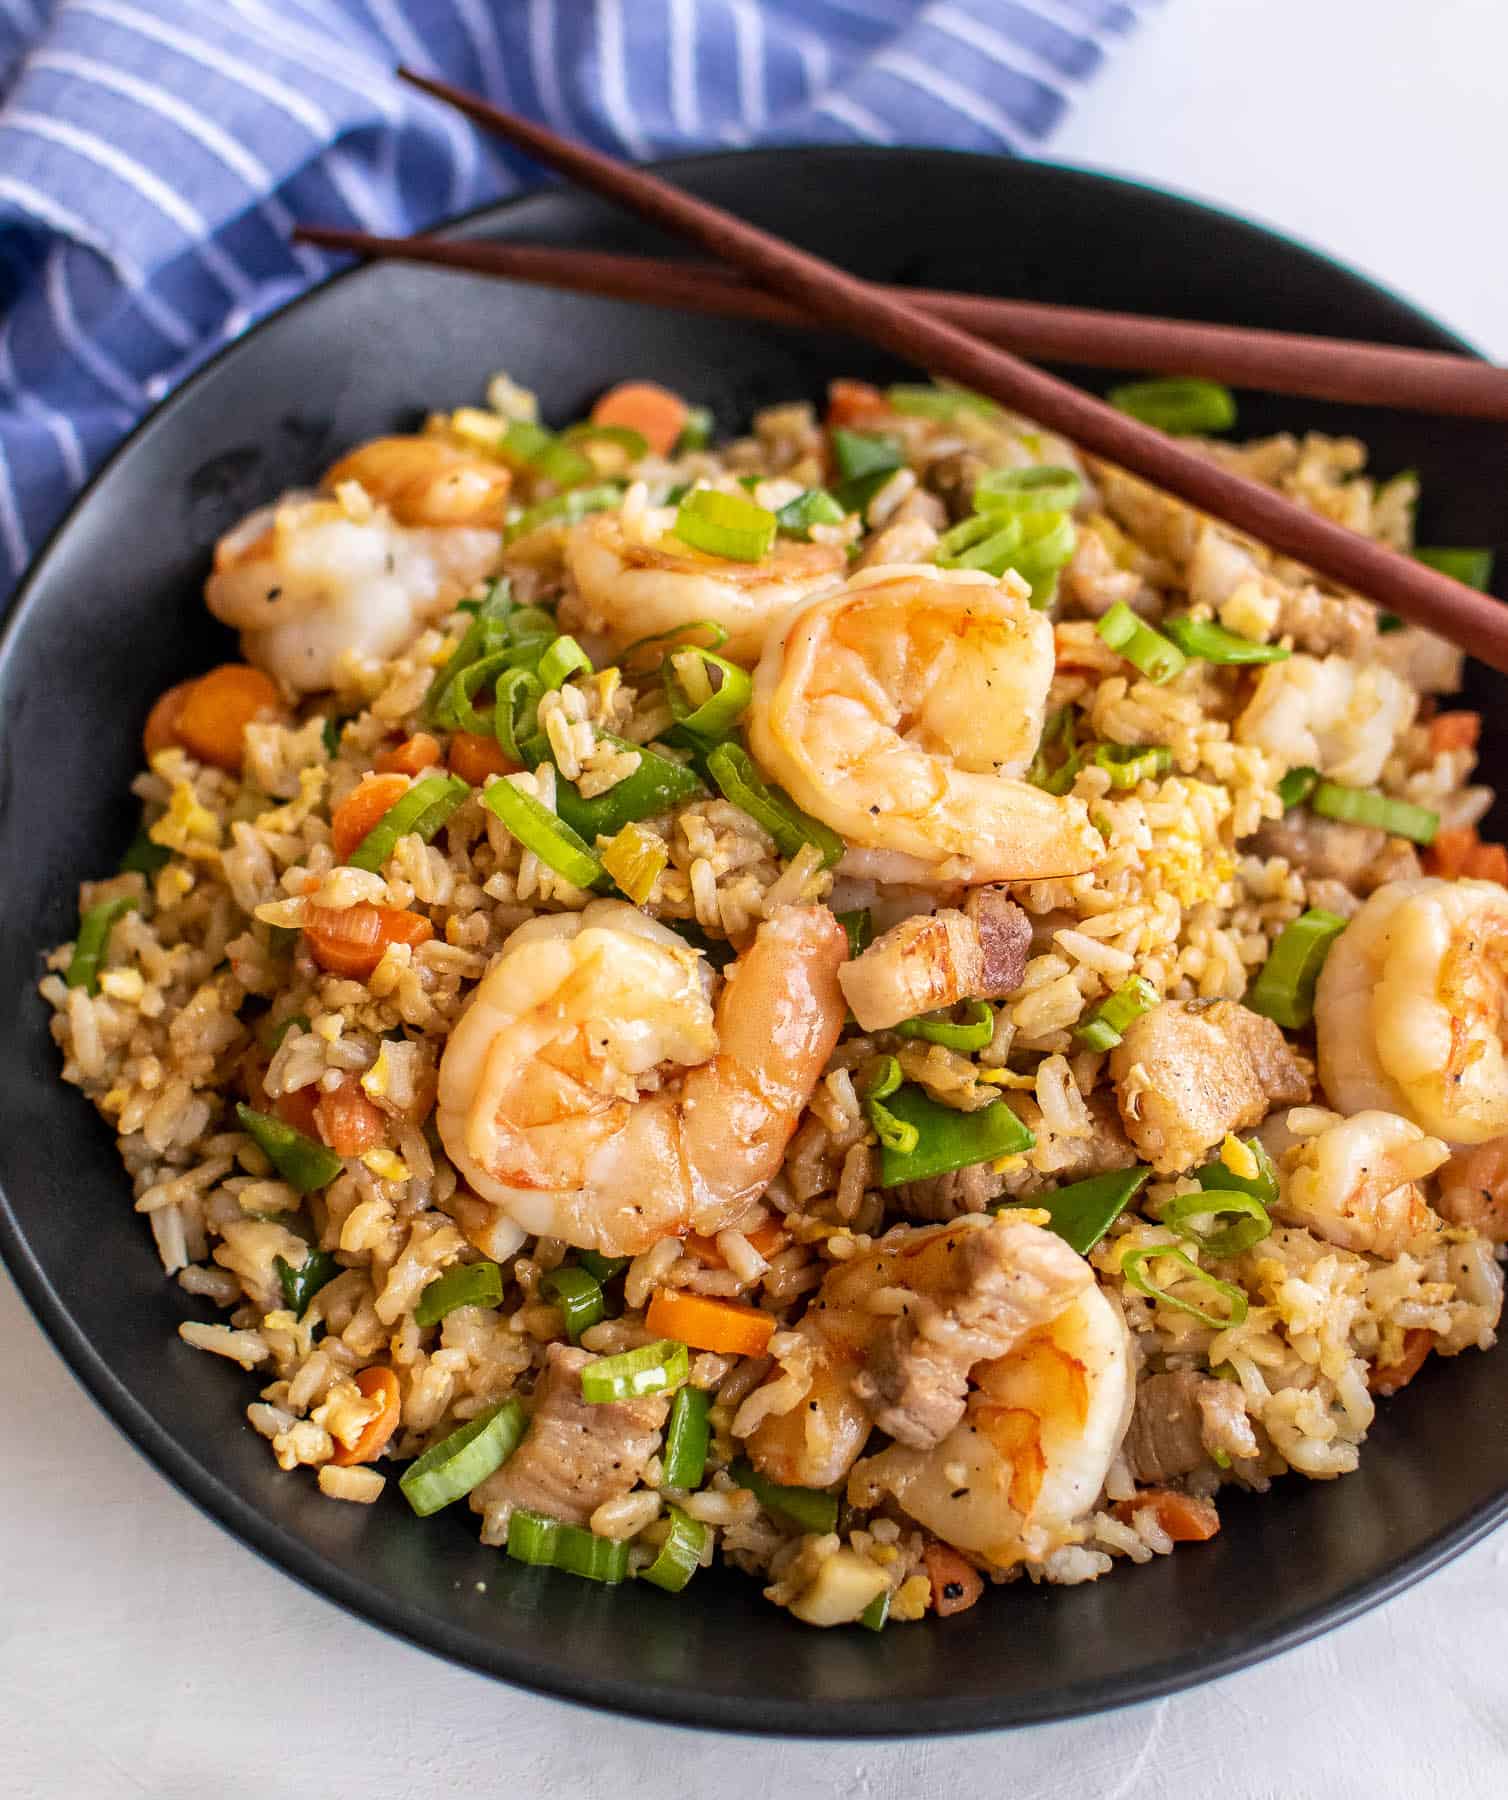 Shrimp fried rice with pork belly in a black bowl with chopsticks.